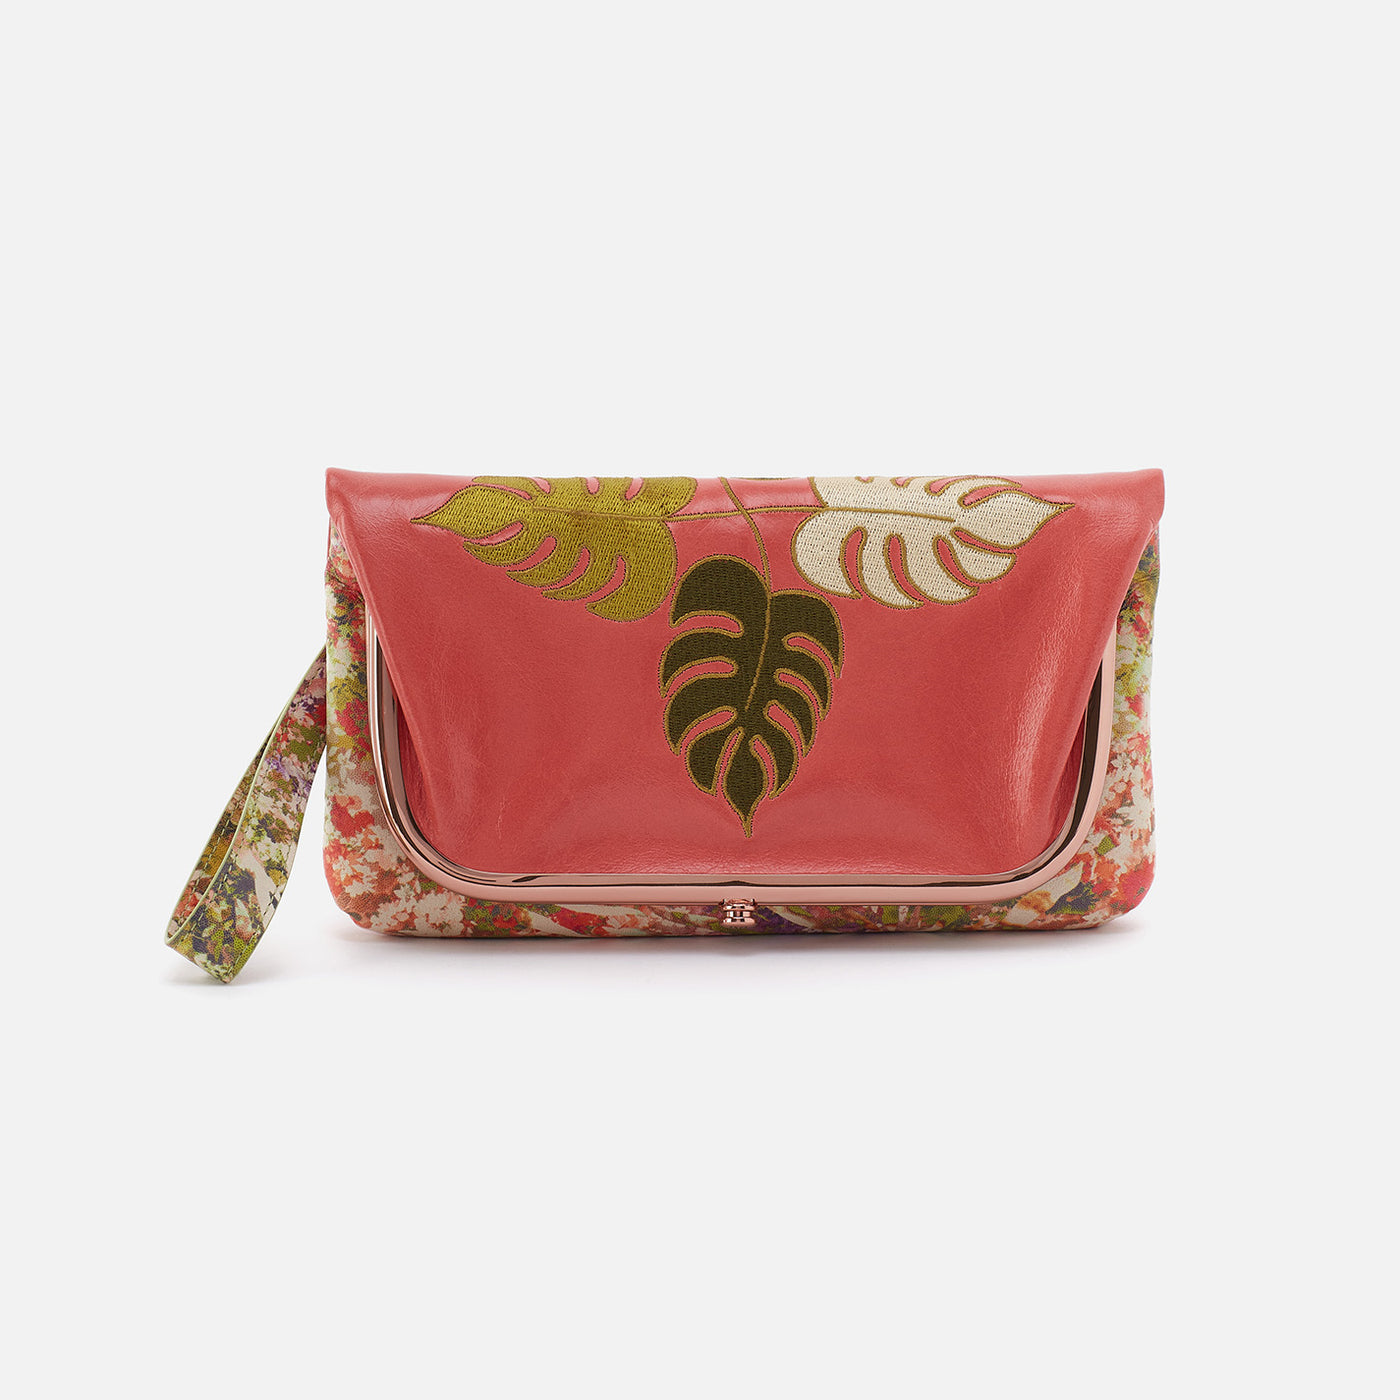 Lauren Wristlet in Mixed Leathers - Cherry Blossom